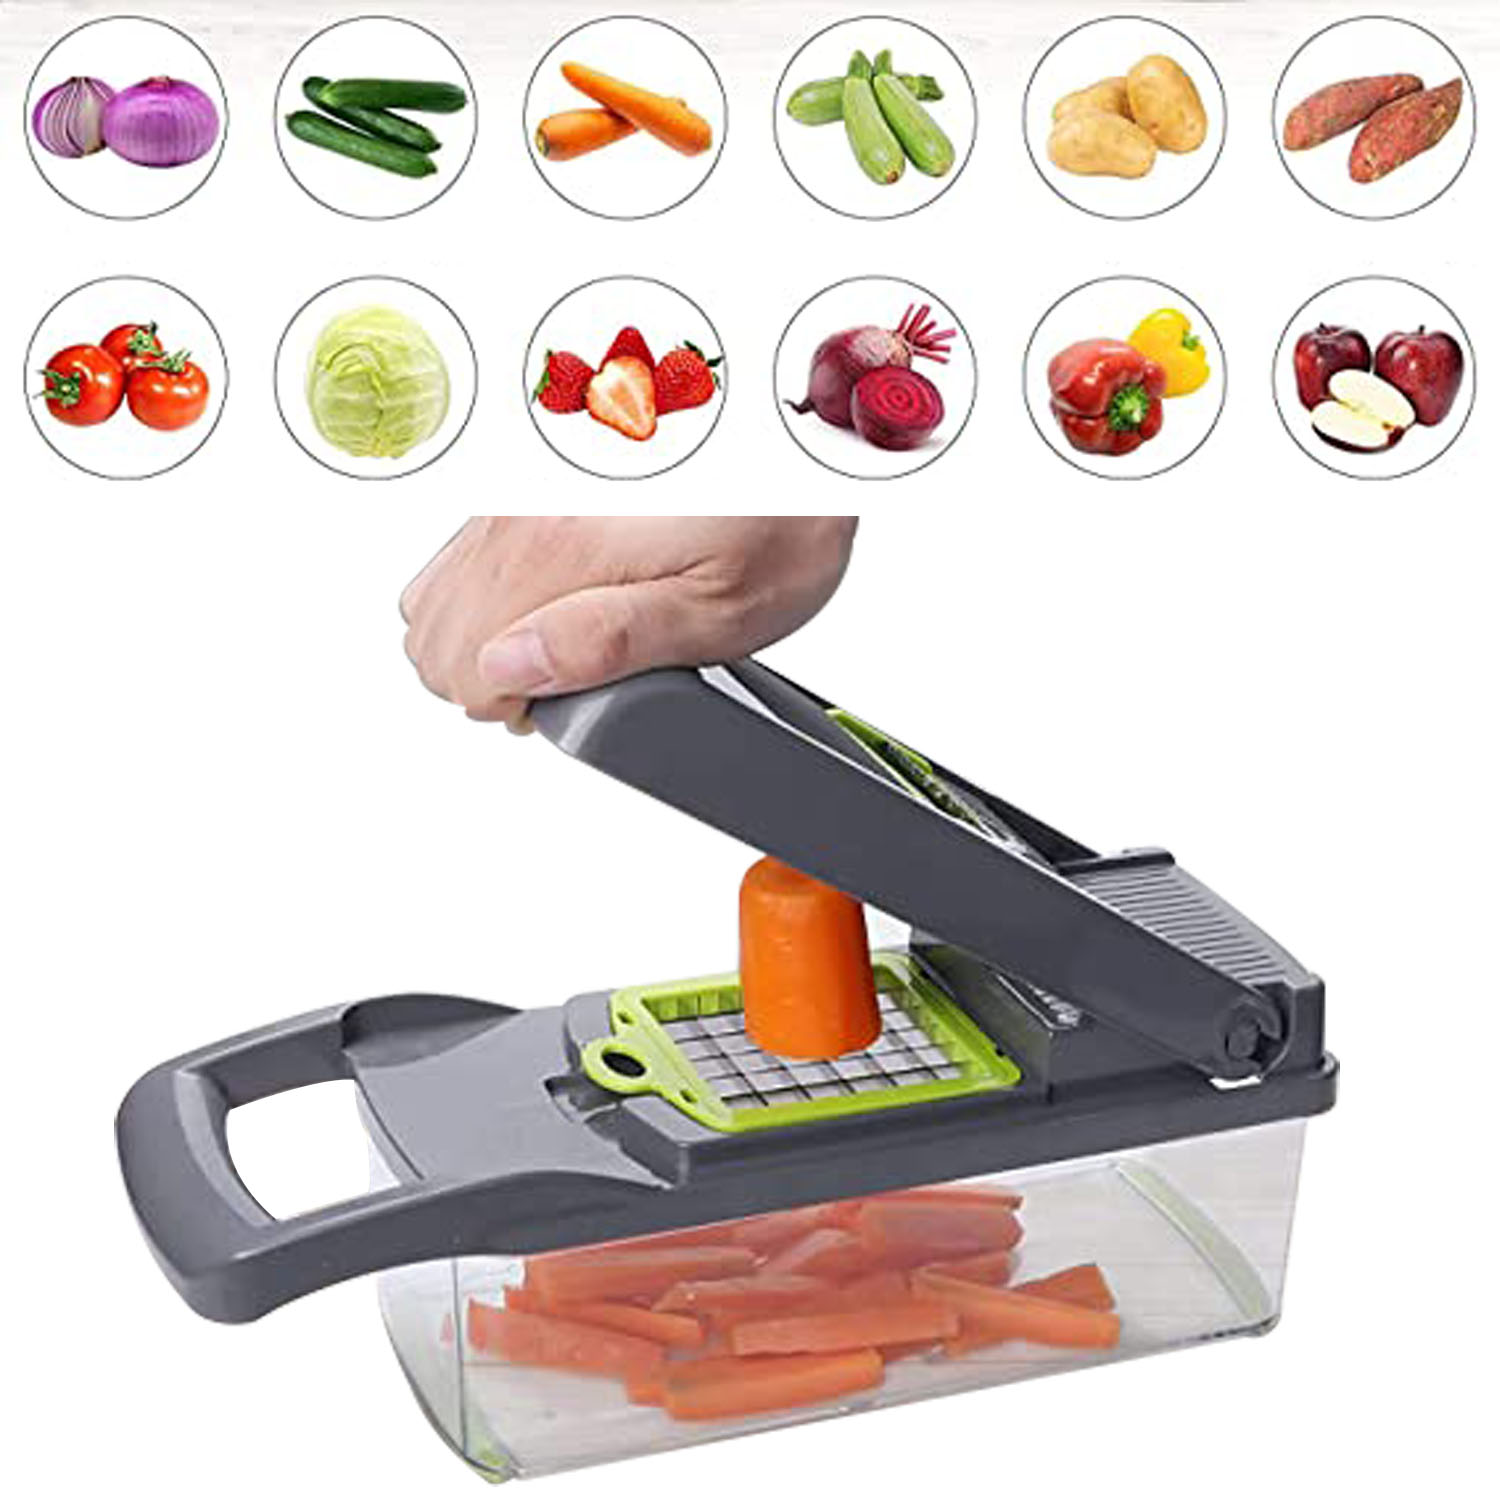  13 in 1 Multifunctional Food Chopper with 8 Blades Slicer Vegetable Cutter With Container Adjustable Vegetable Cutter Vegetable, Onion Chopper